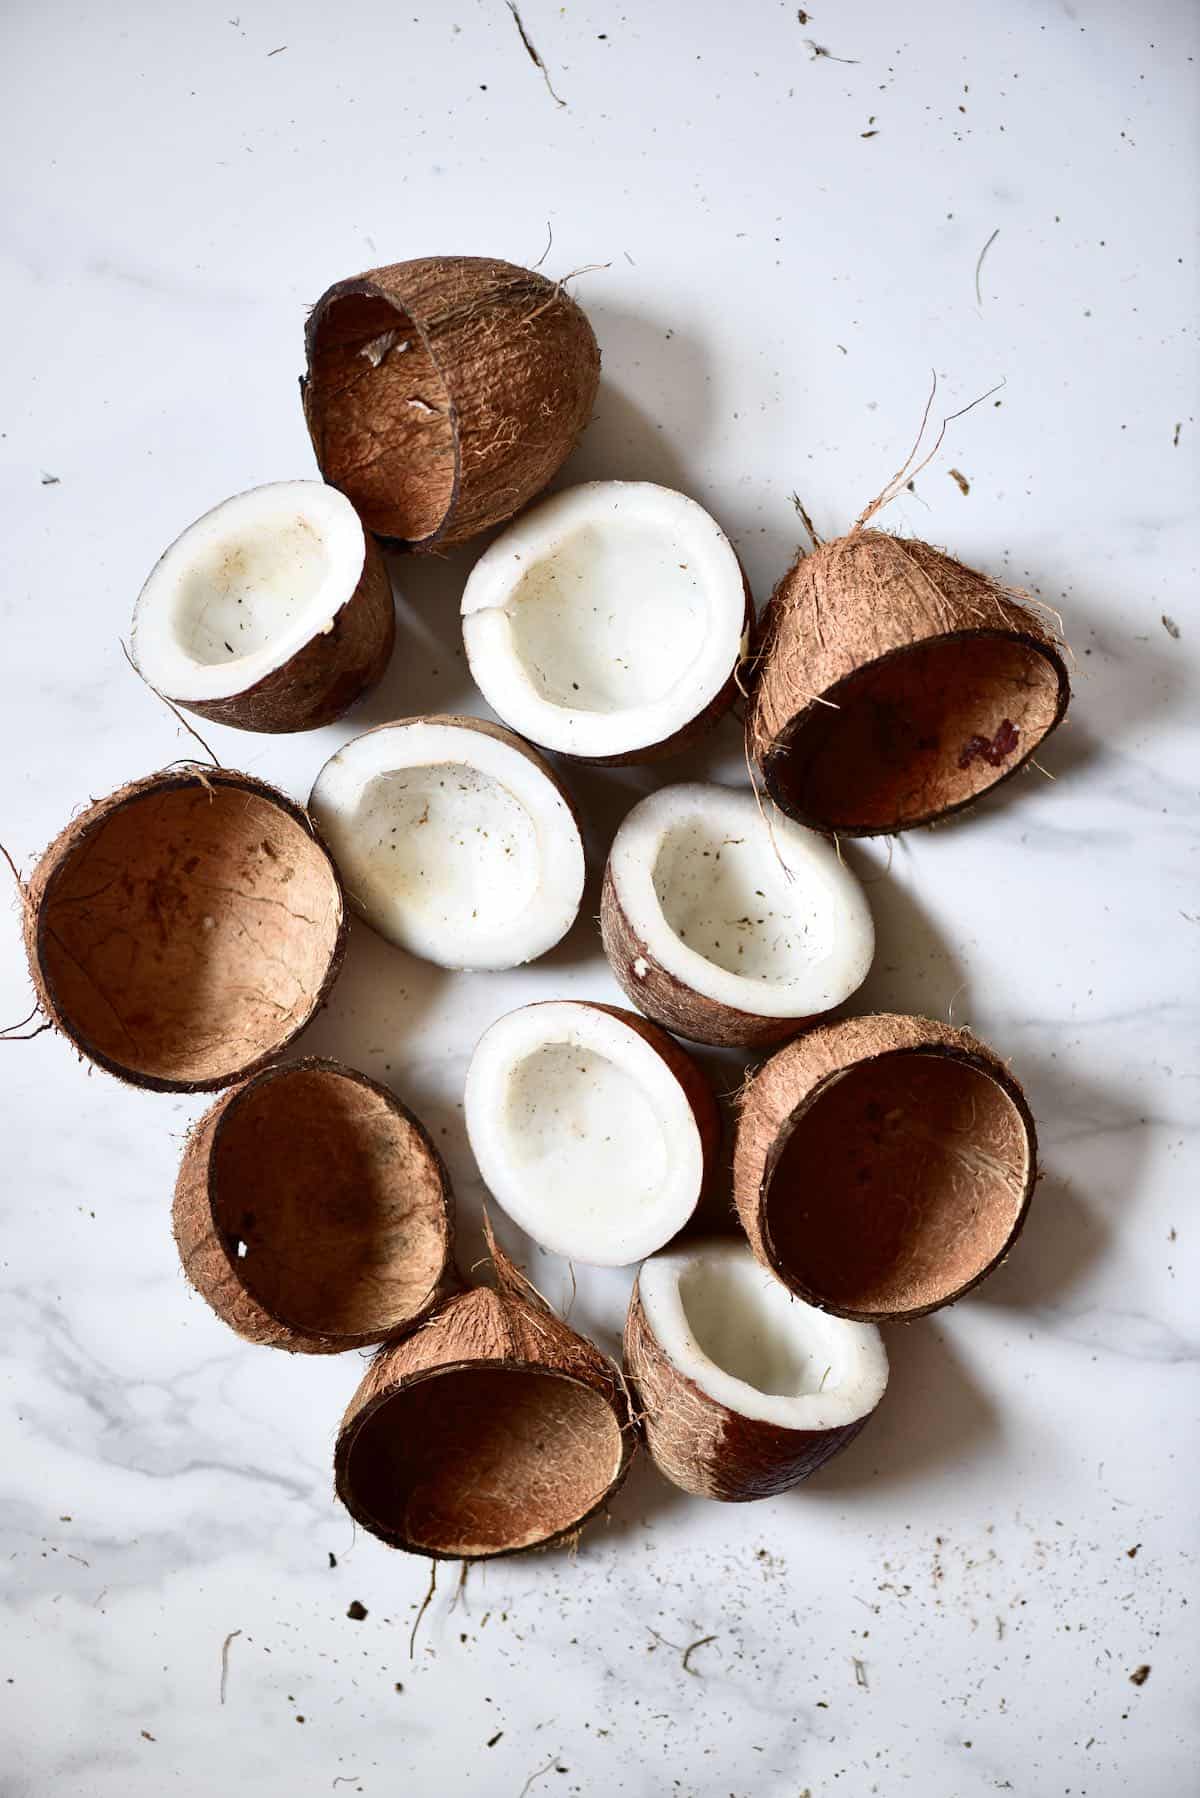 5 ways coconut shells can spruce up your home decor